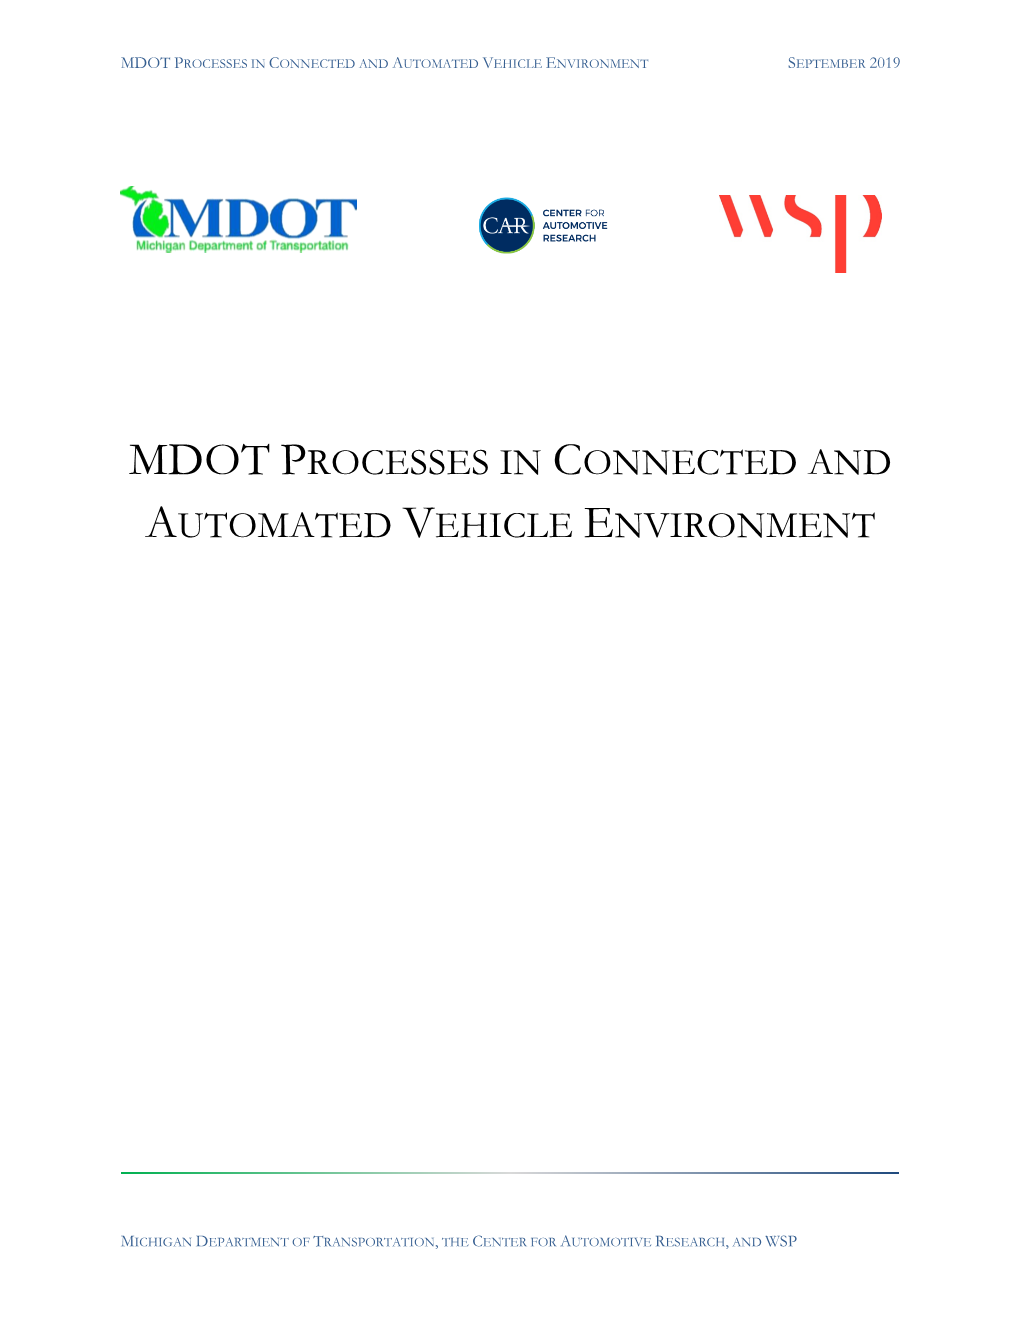 Mdot Processes in Connected and Automated Vehicle Environment September 2019